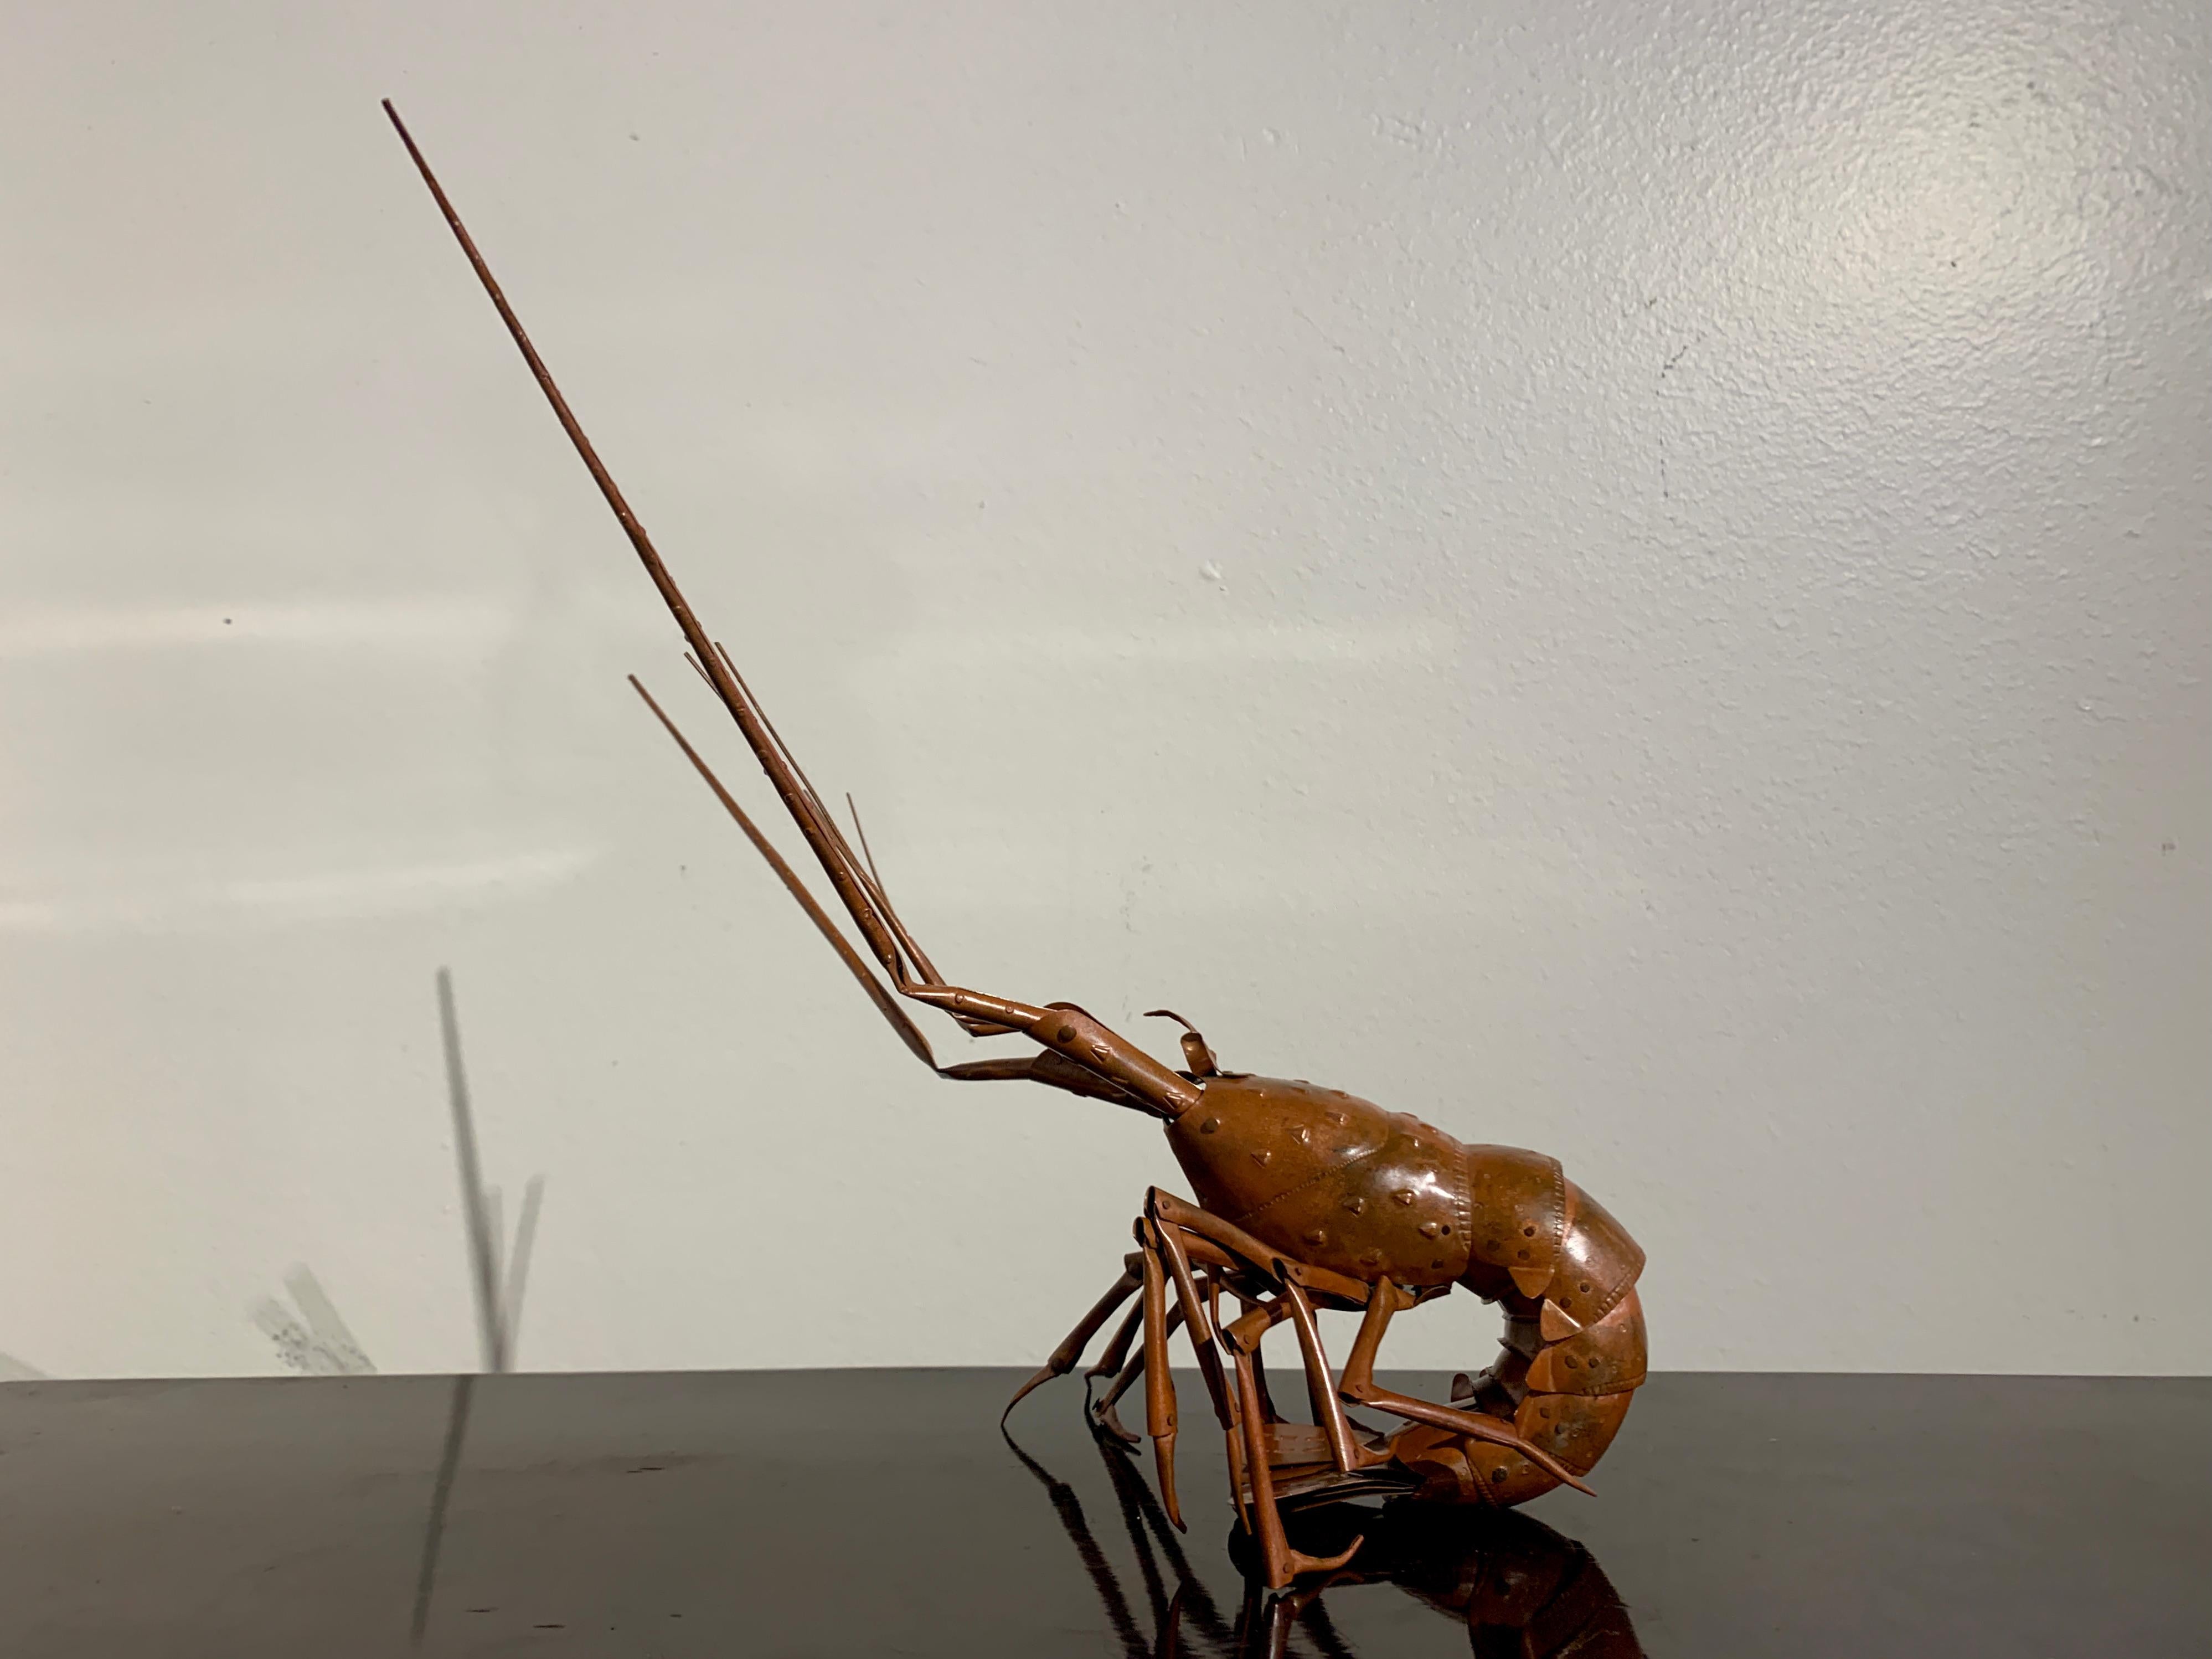 A fascinating and whimsical Japanese articulated model of a spiny lobster, jizai okimono, by Muneyuki Myochin, the fifty first head of the Myochin school of metal workers, Showa Era, mid 20th century, Japan. 

The spiny lobster ingeniously and